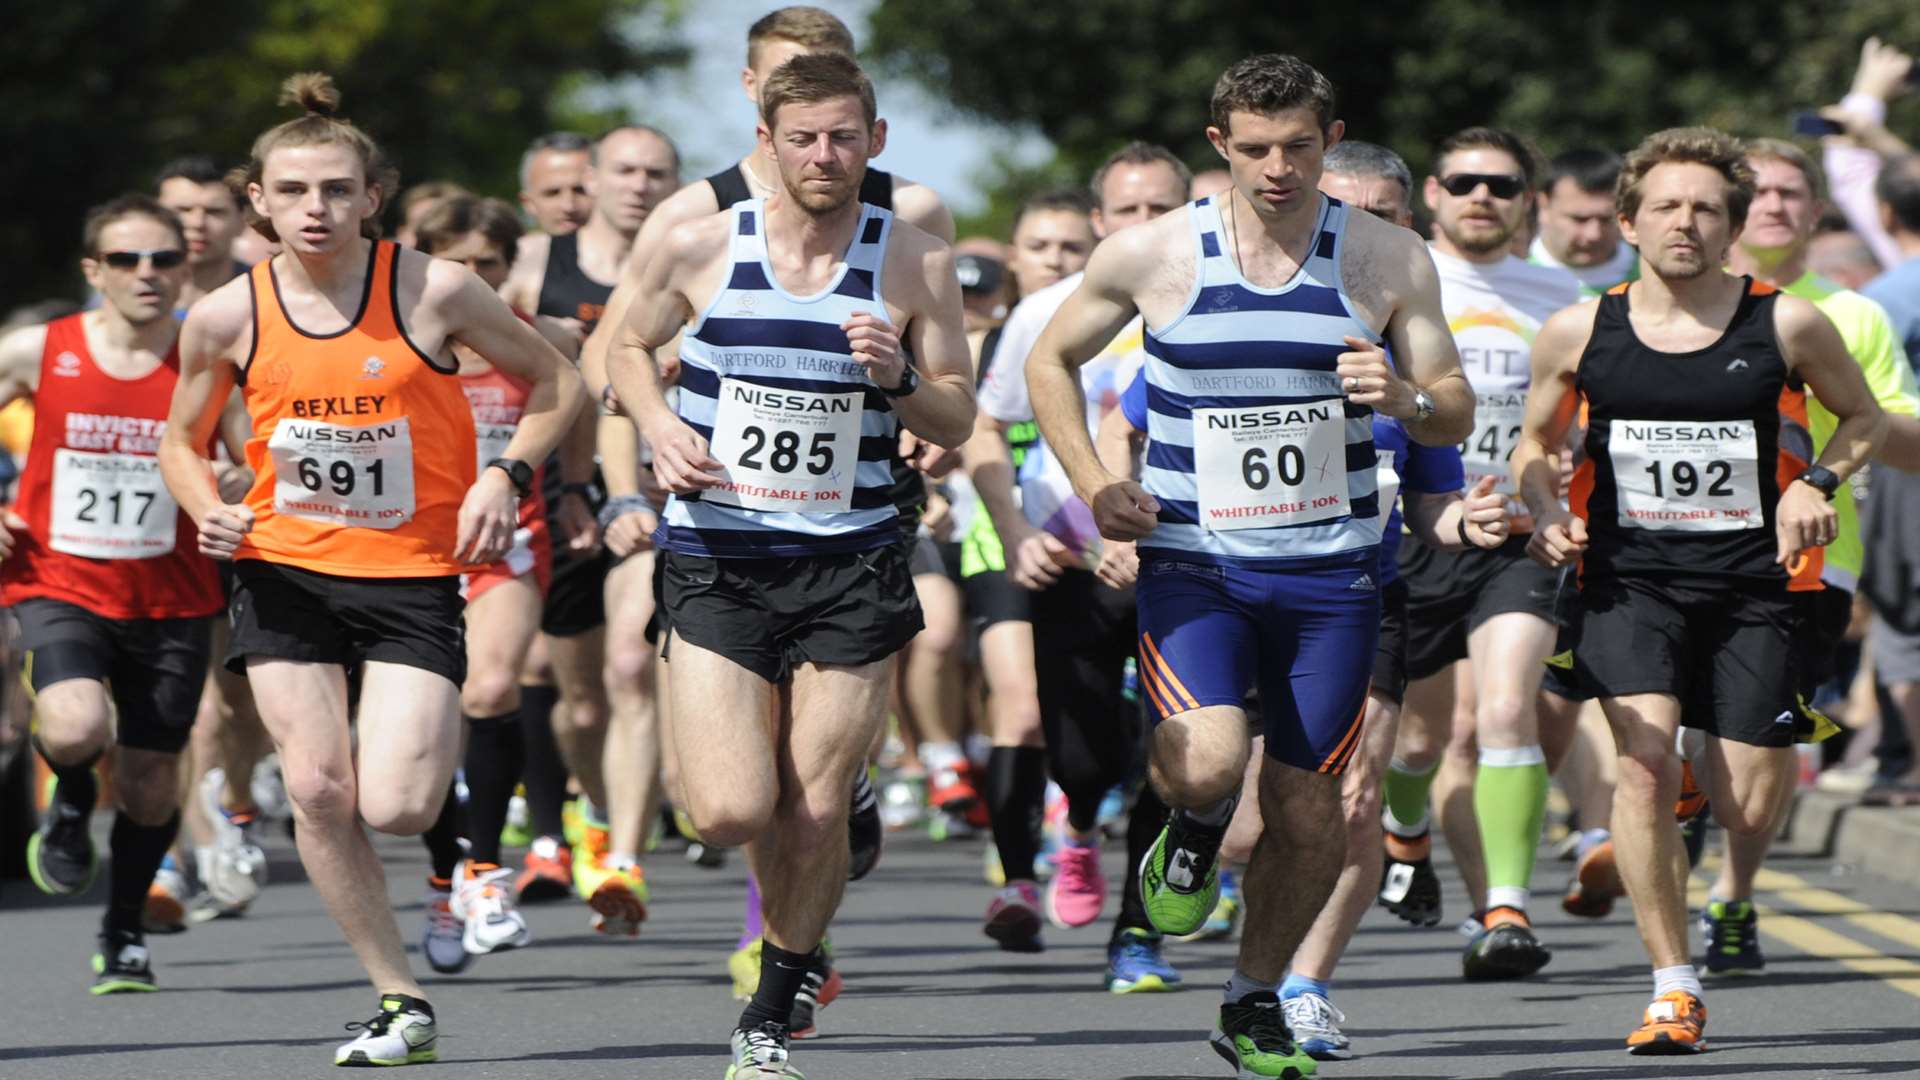 Dartford Harriers duo Andrew Pickett and Daniel Pyne lead the field at the start of Monday's Whitstable 10k Picture: Tony Flashman